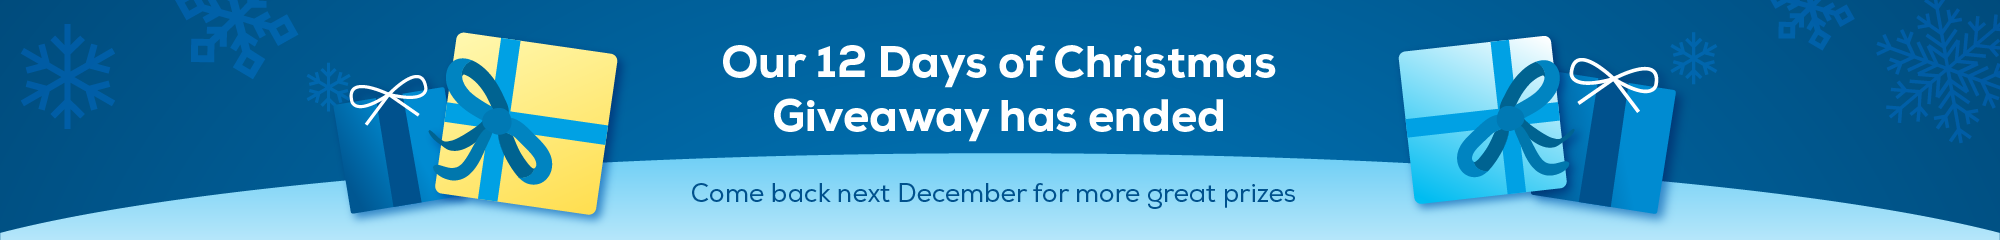 12 Days of Christmas Giveaway has ended - See you next year!